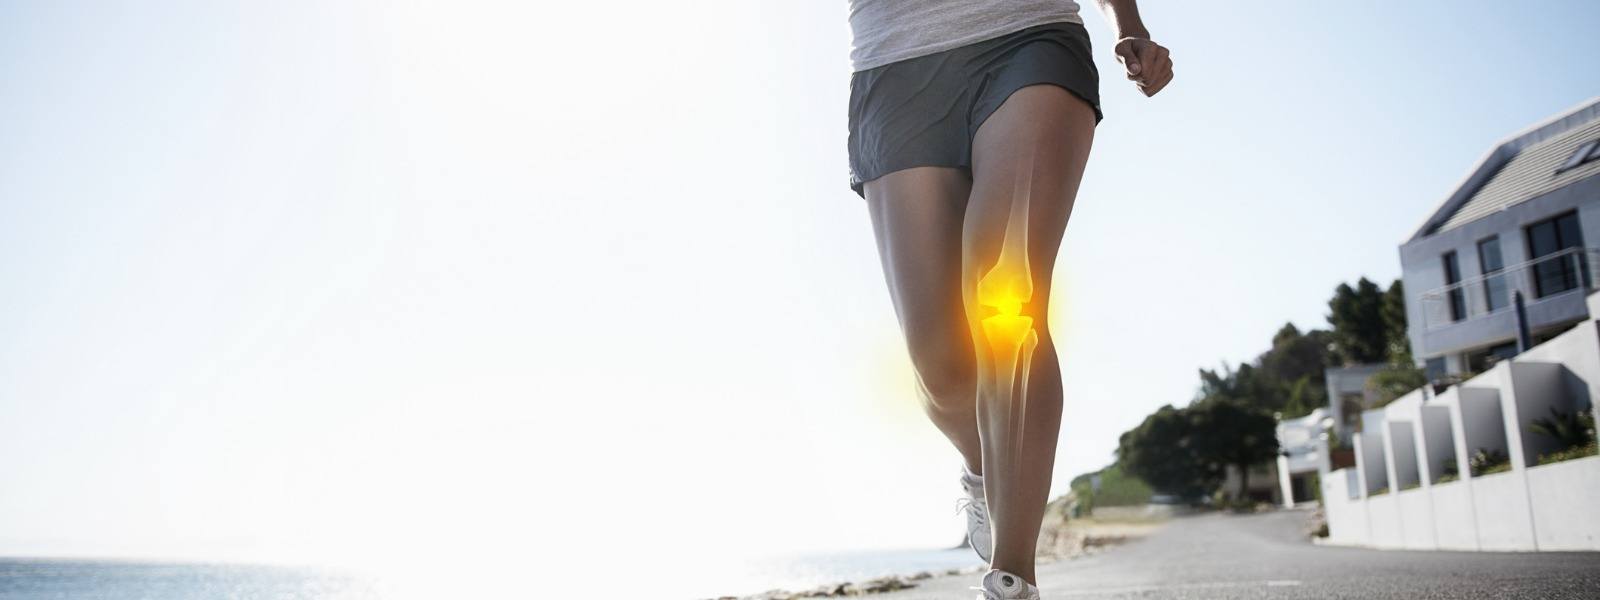 Woman running with knee pain